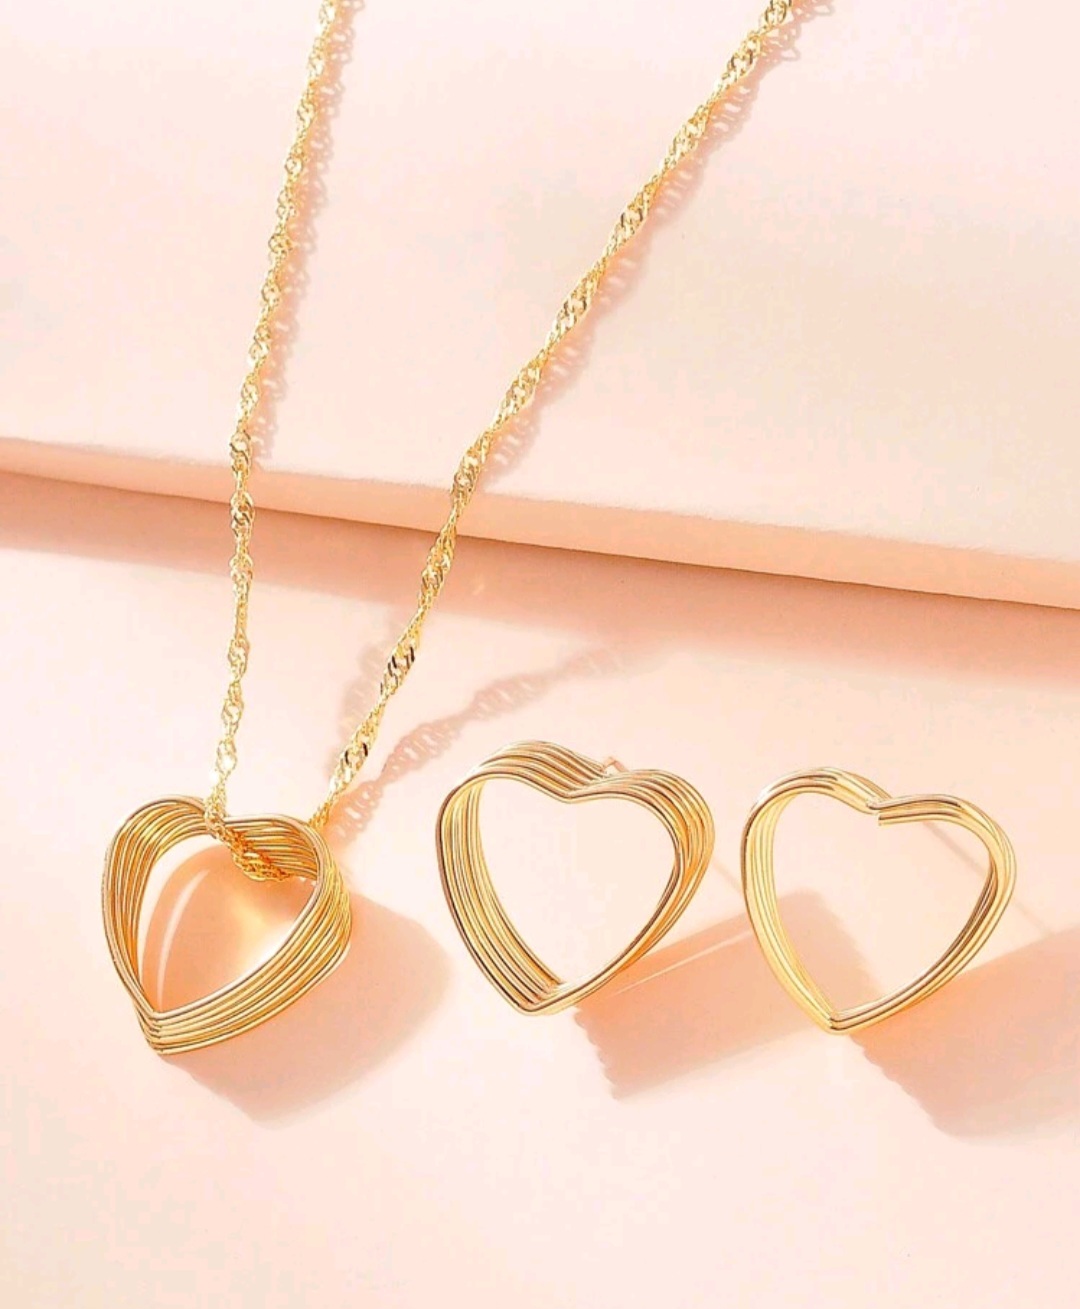 1pair Earrings & 1pc Necklace Fashionable Gold-Color Heart Shaped Ring Design Temperamental Women Jewelry Set, Suitable For Women And Girls, It Can Be Worn In Dating, Vacation, Holiday Parties, Daily Life And Other Occasions